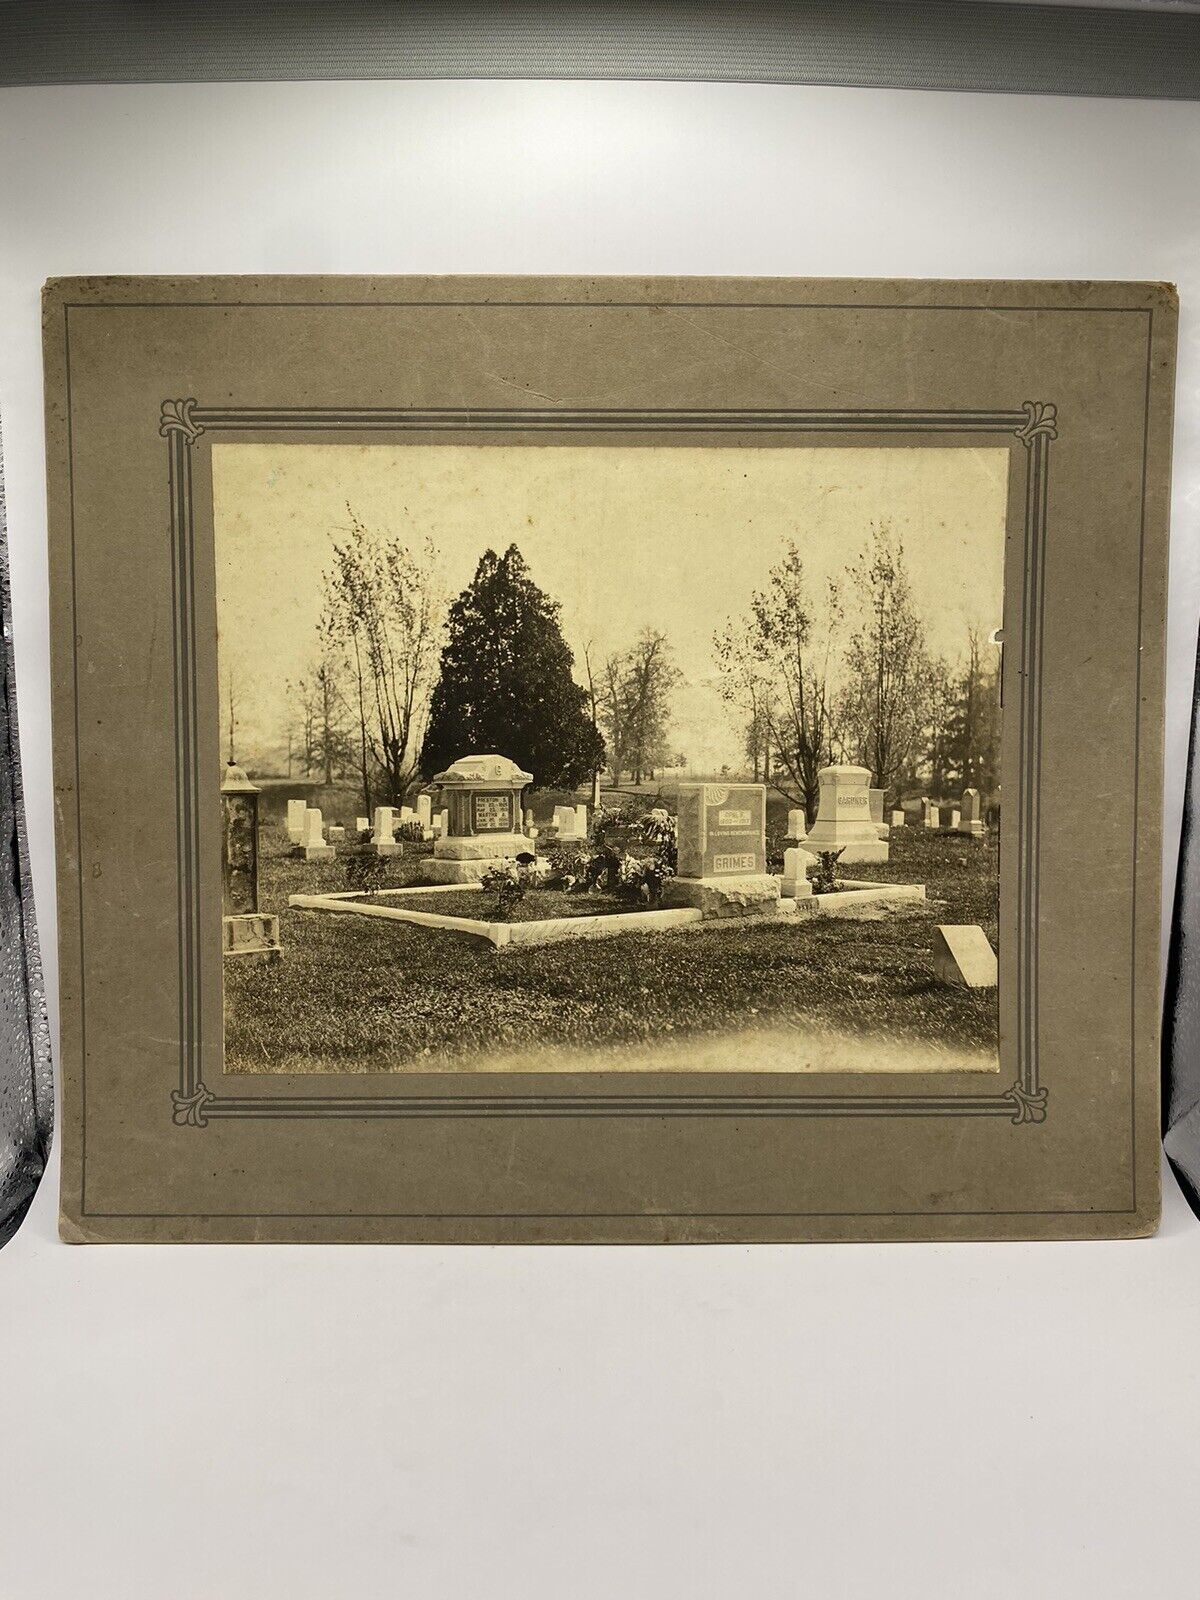 Antique Large 14”x12” Cabinet Card Cemetery Grave Site Early 1900’s